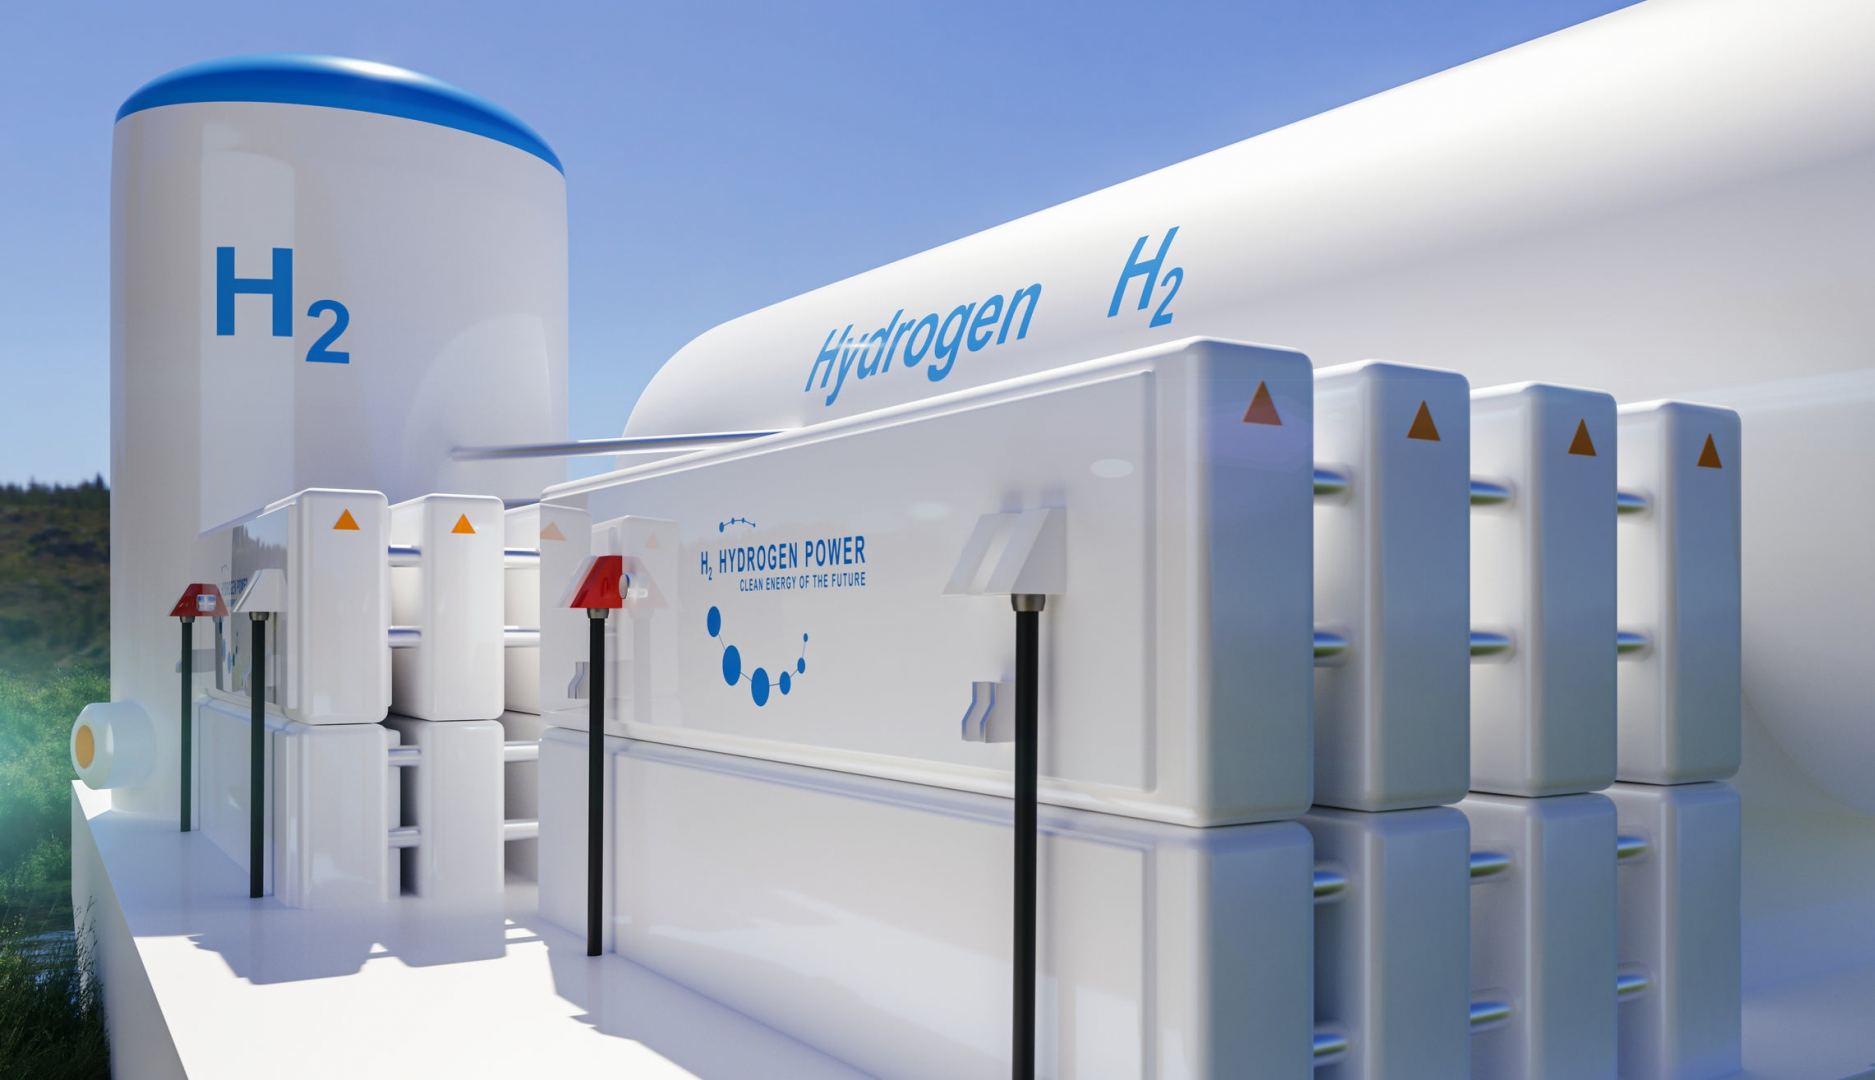 Azerbaijan has high potential for hydrogen production - State Agency for Renewable Energy Sources